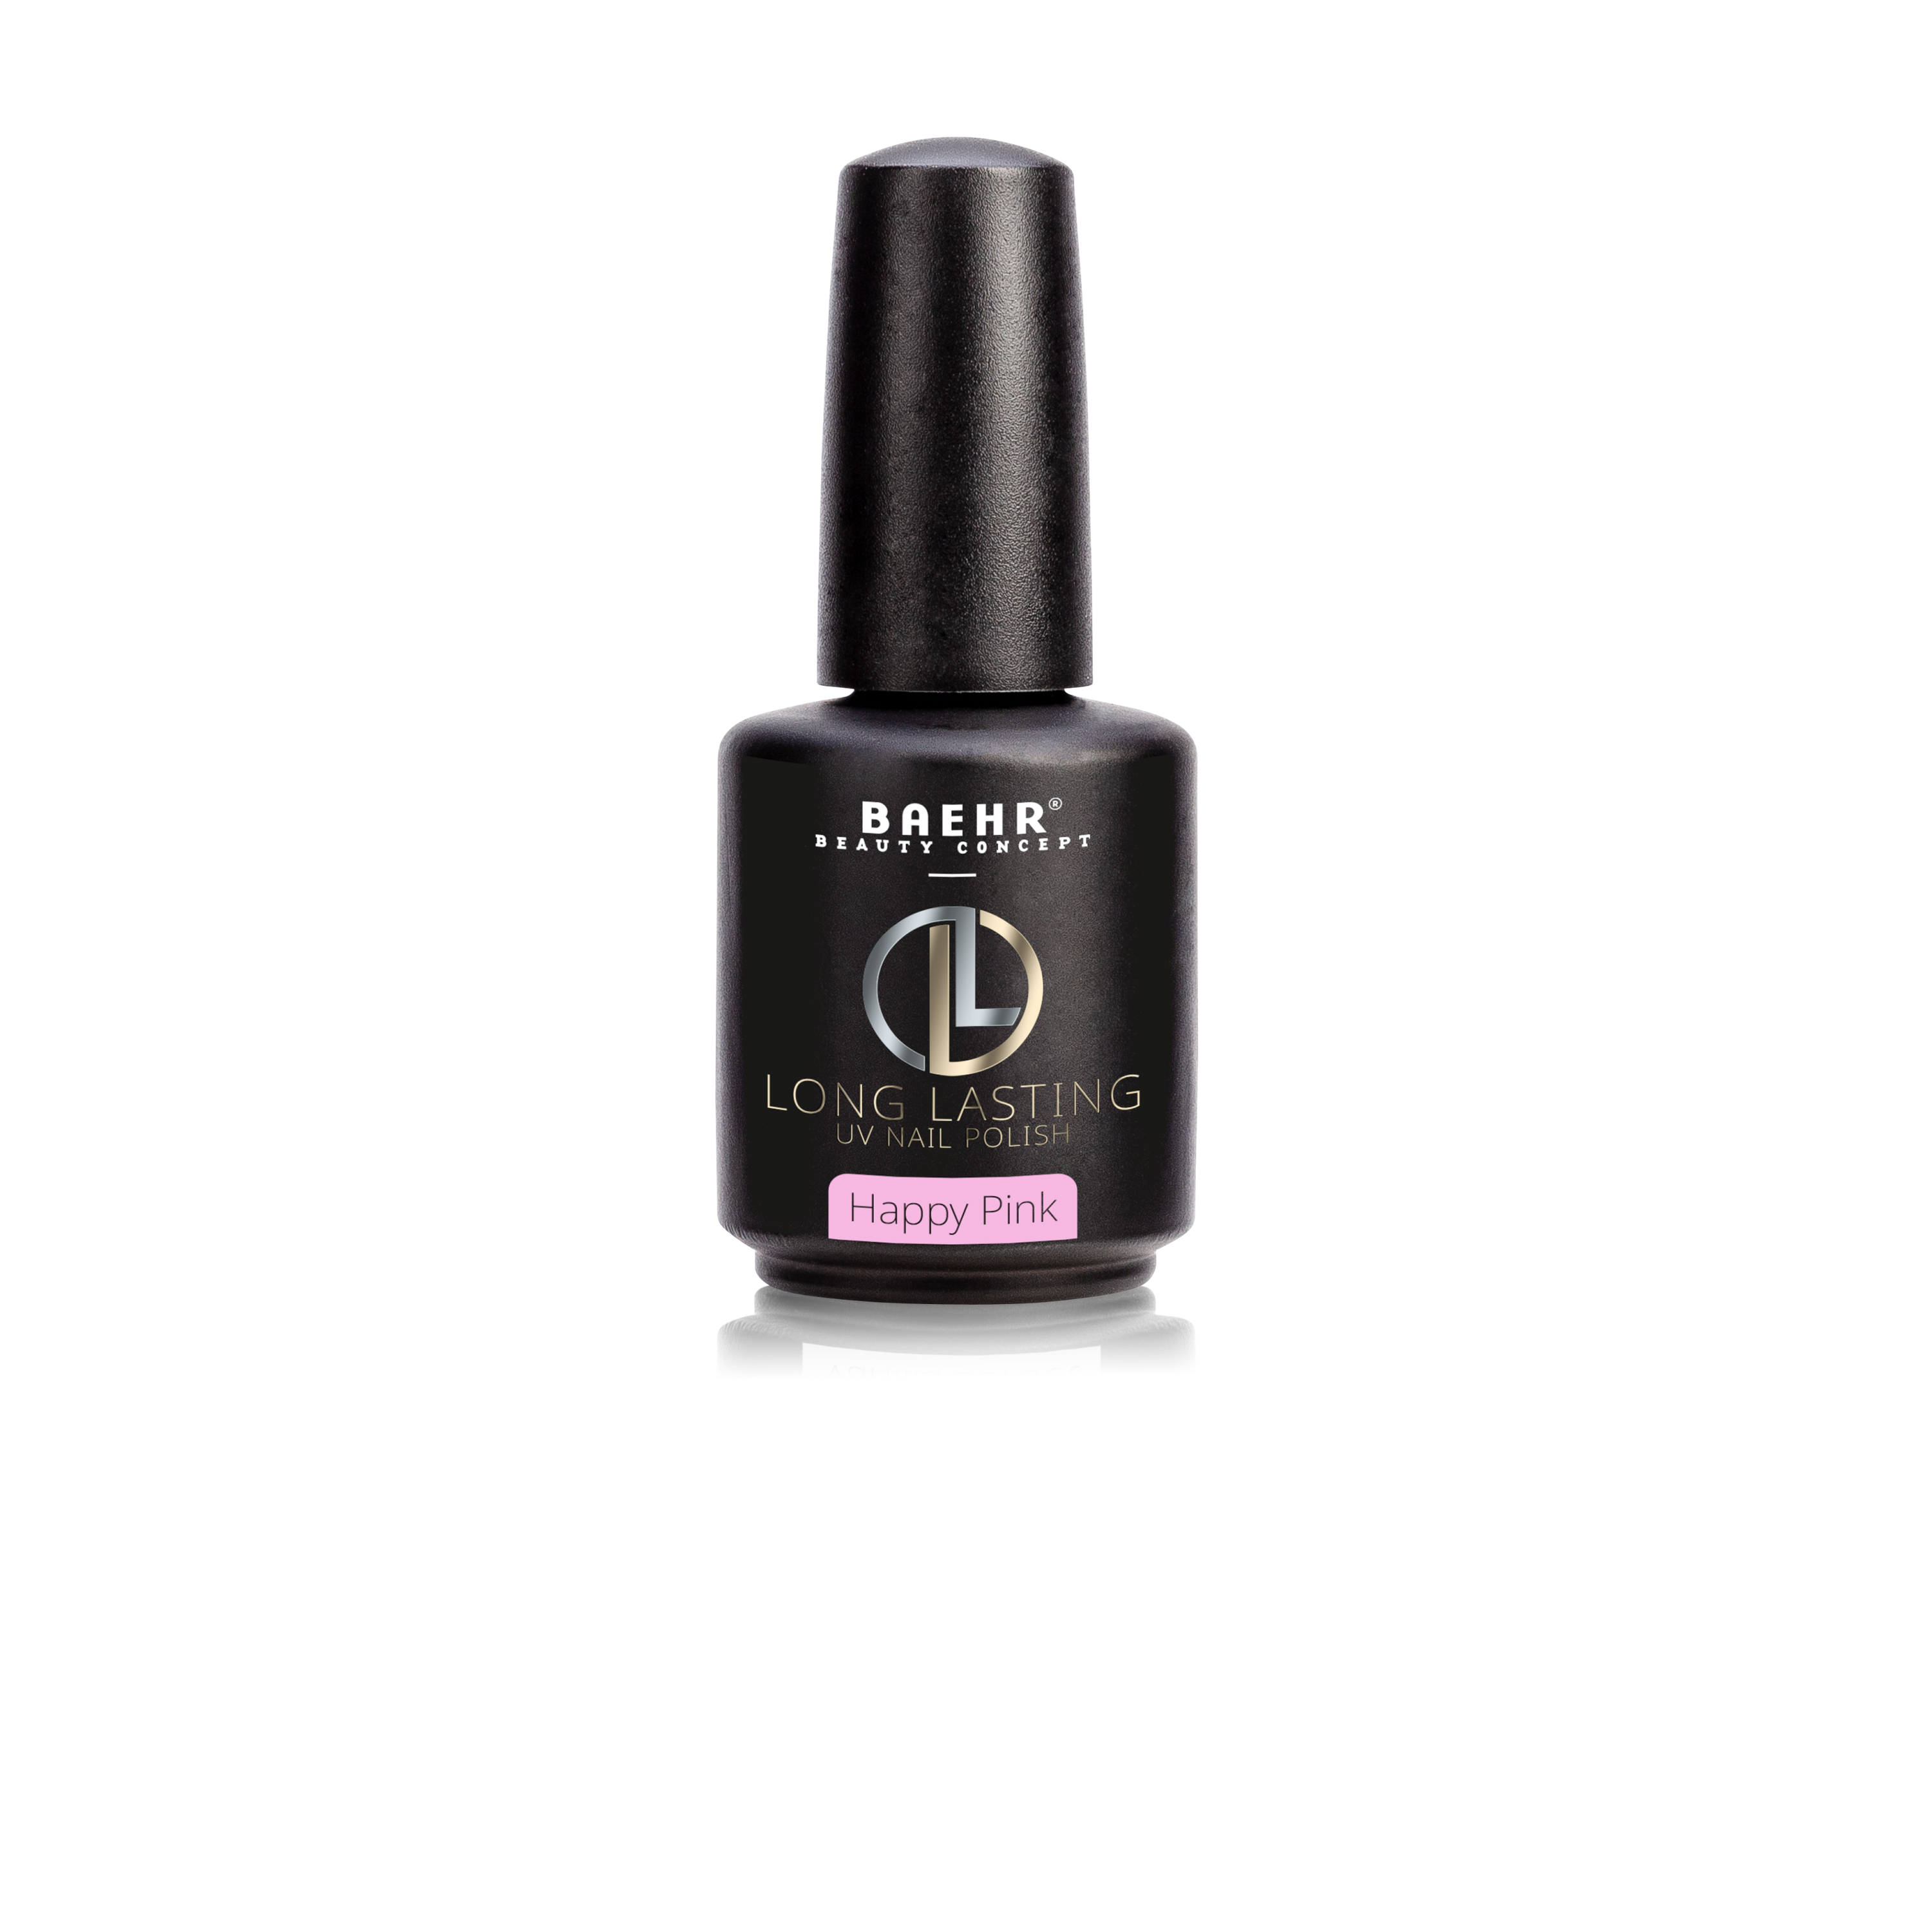 BAEHR BEAUTY CONCEPT - NAILS Long Lasting Happy Pink 12 ml